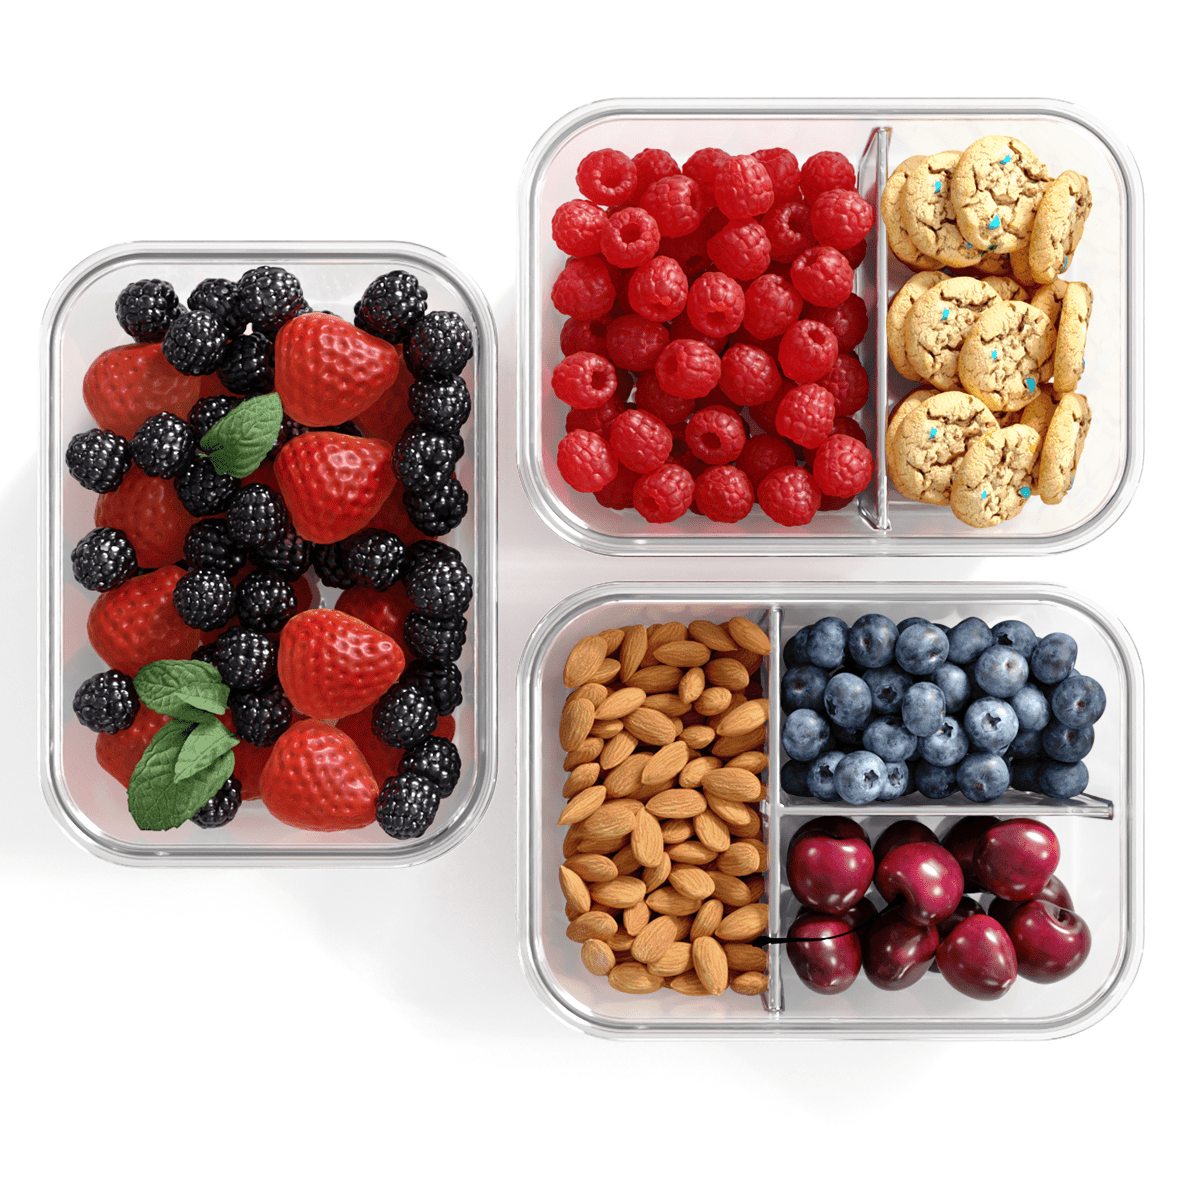 Glass Food Storage Containers Set With Leakproof Airtight Lids, Glass Meal  Prep Containers, Lead Free, Microwave, Oven, Freezer And Dishwasher Safe,  For Meal Prep, Lunch And Portion Control, Kitchen Accessories & 